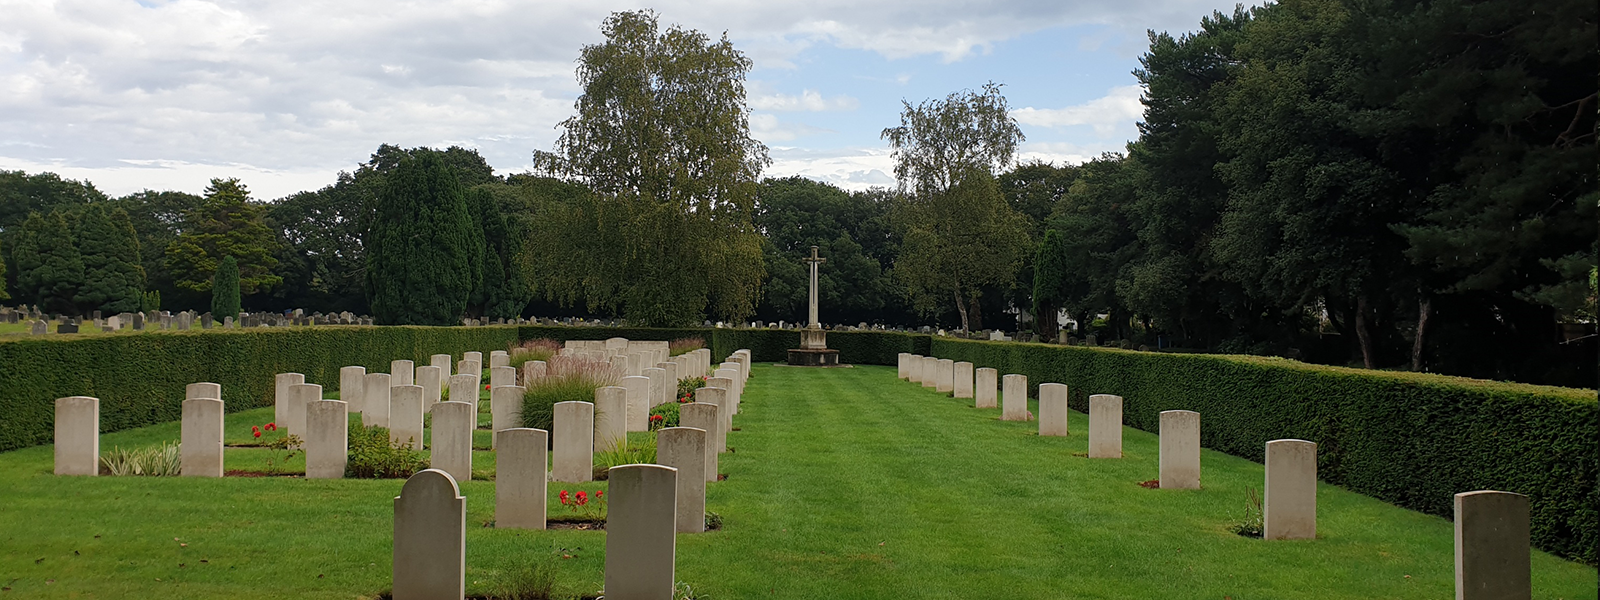 The war graves at North cemetery